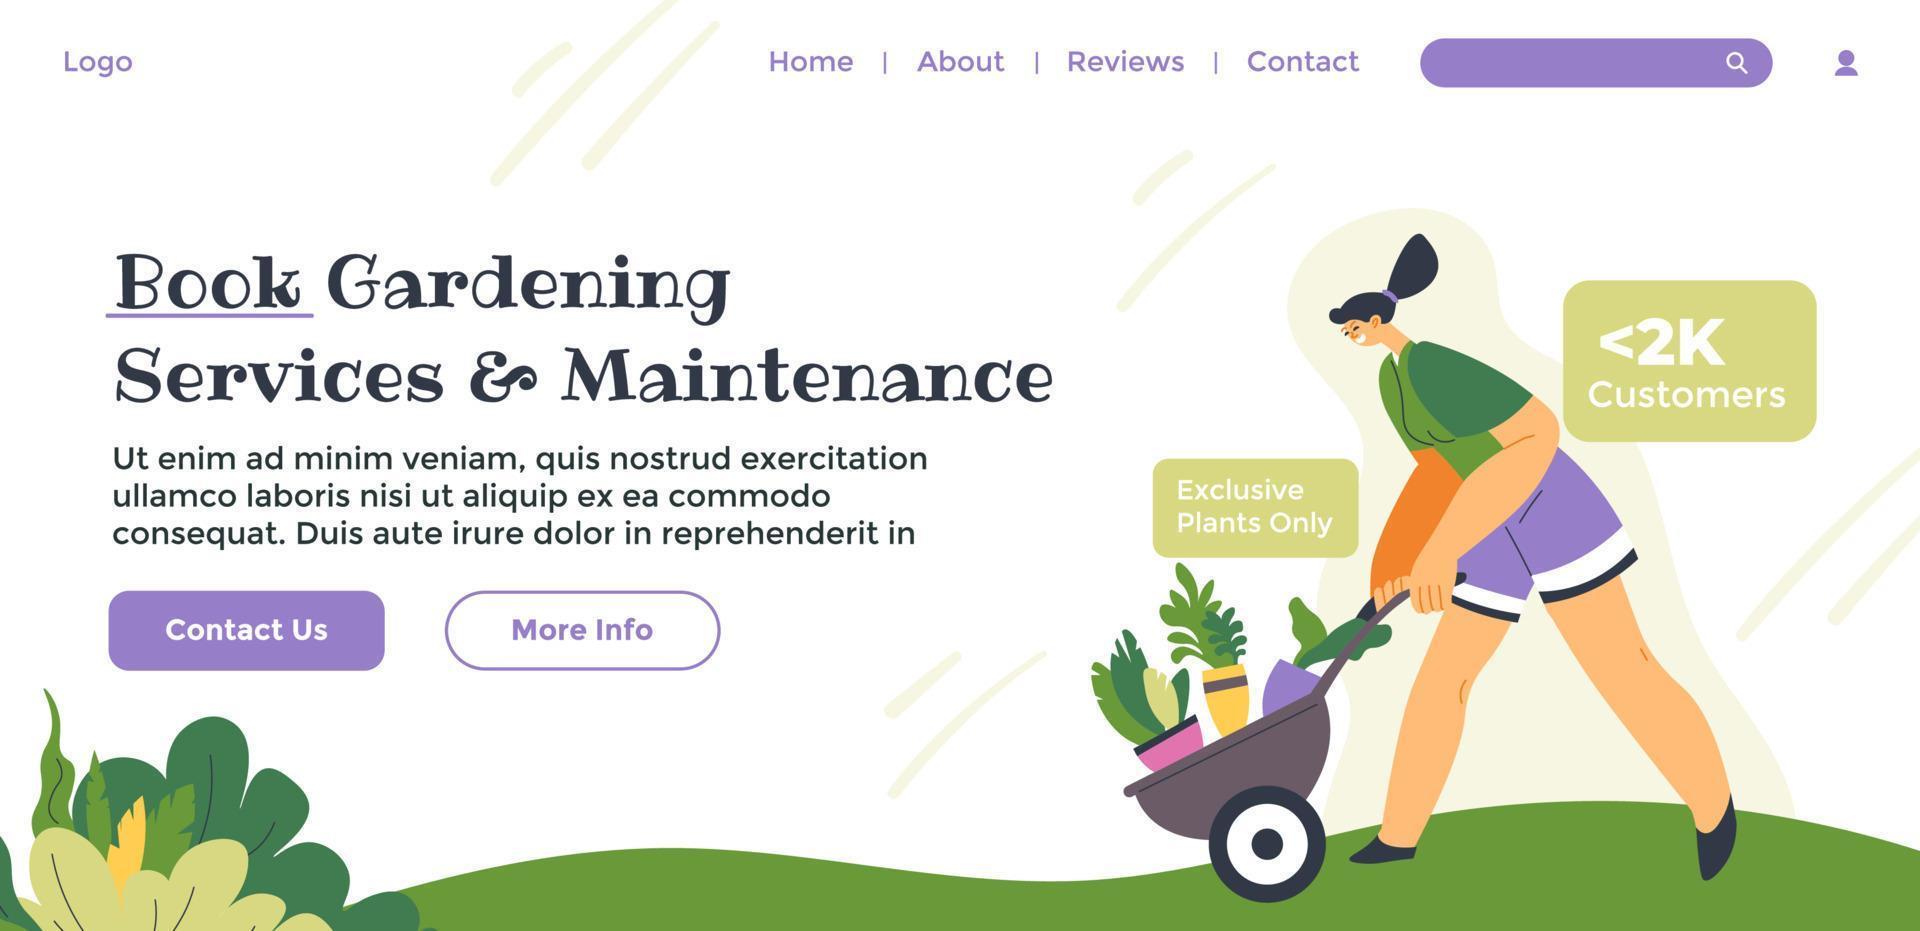 Book gardening services and maintenance website vector